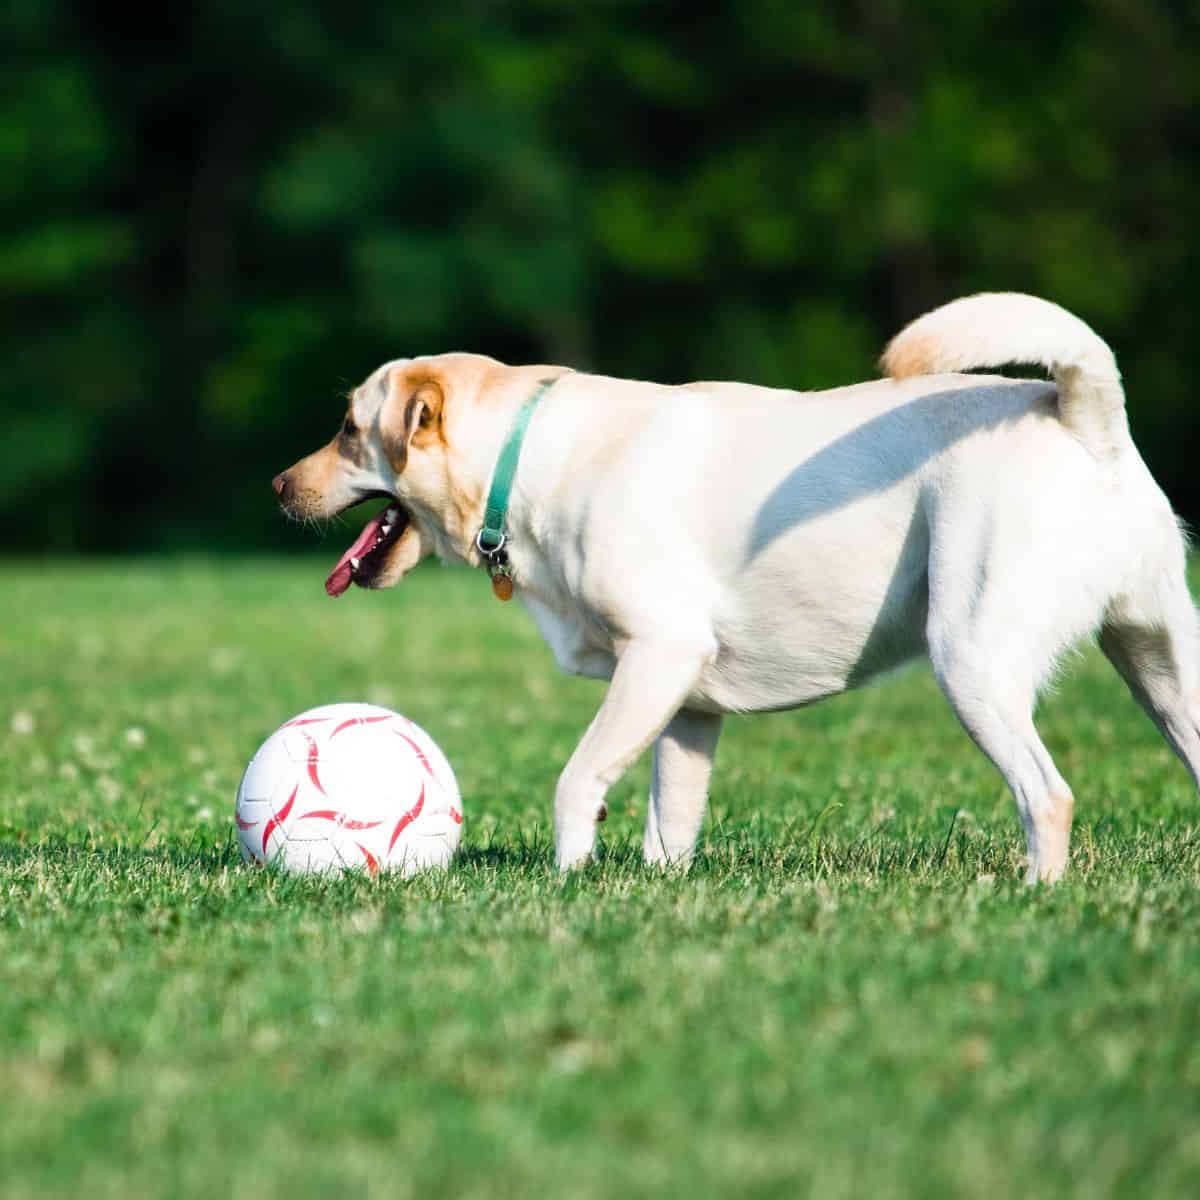 yellow lab playing soccer with a red and white ball on grass after learning to play soccer